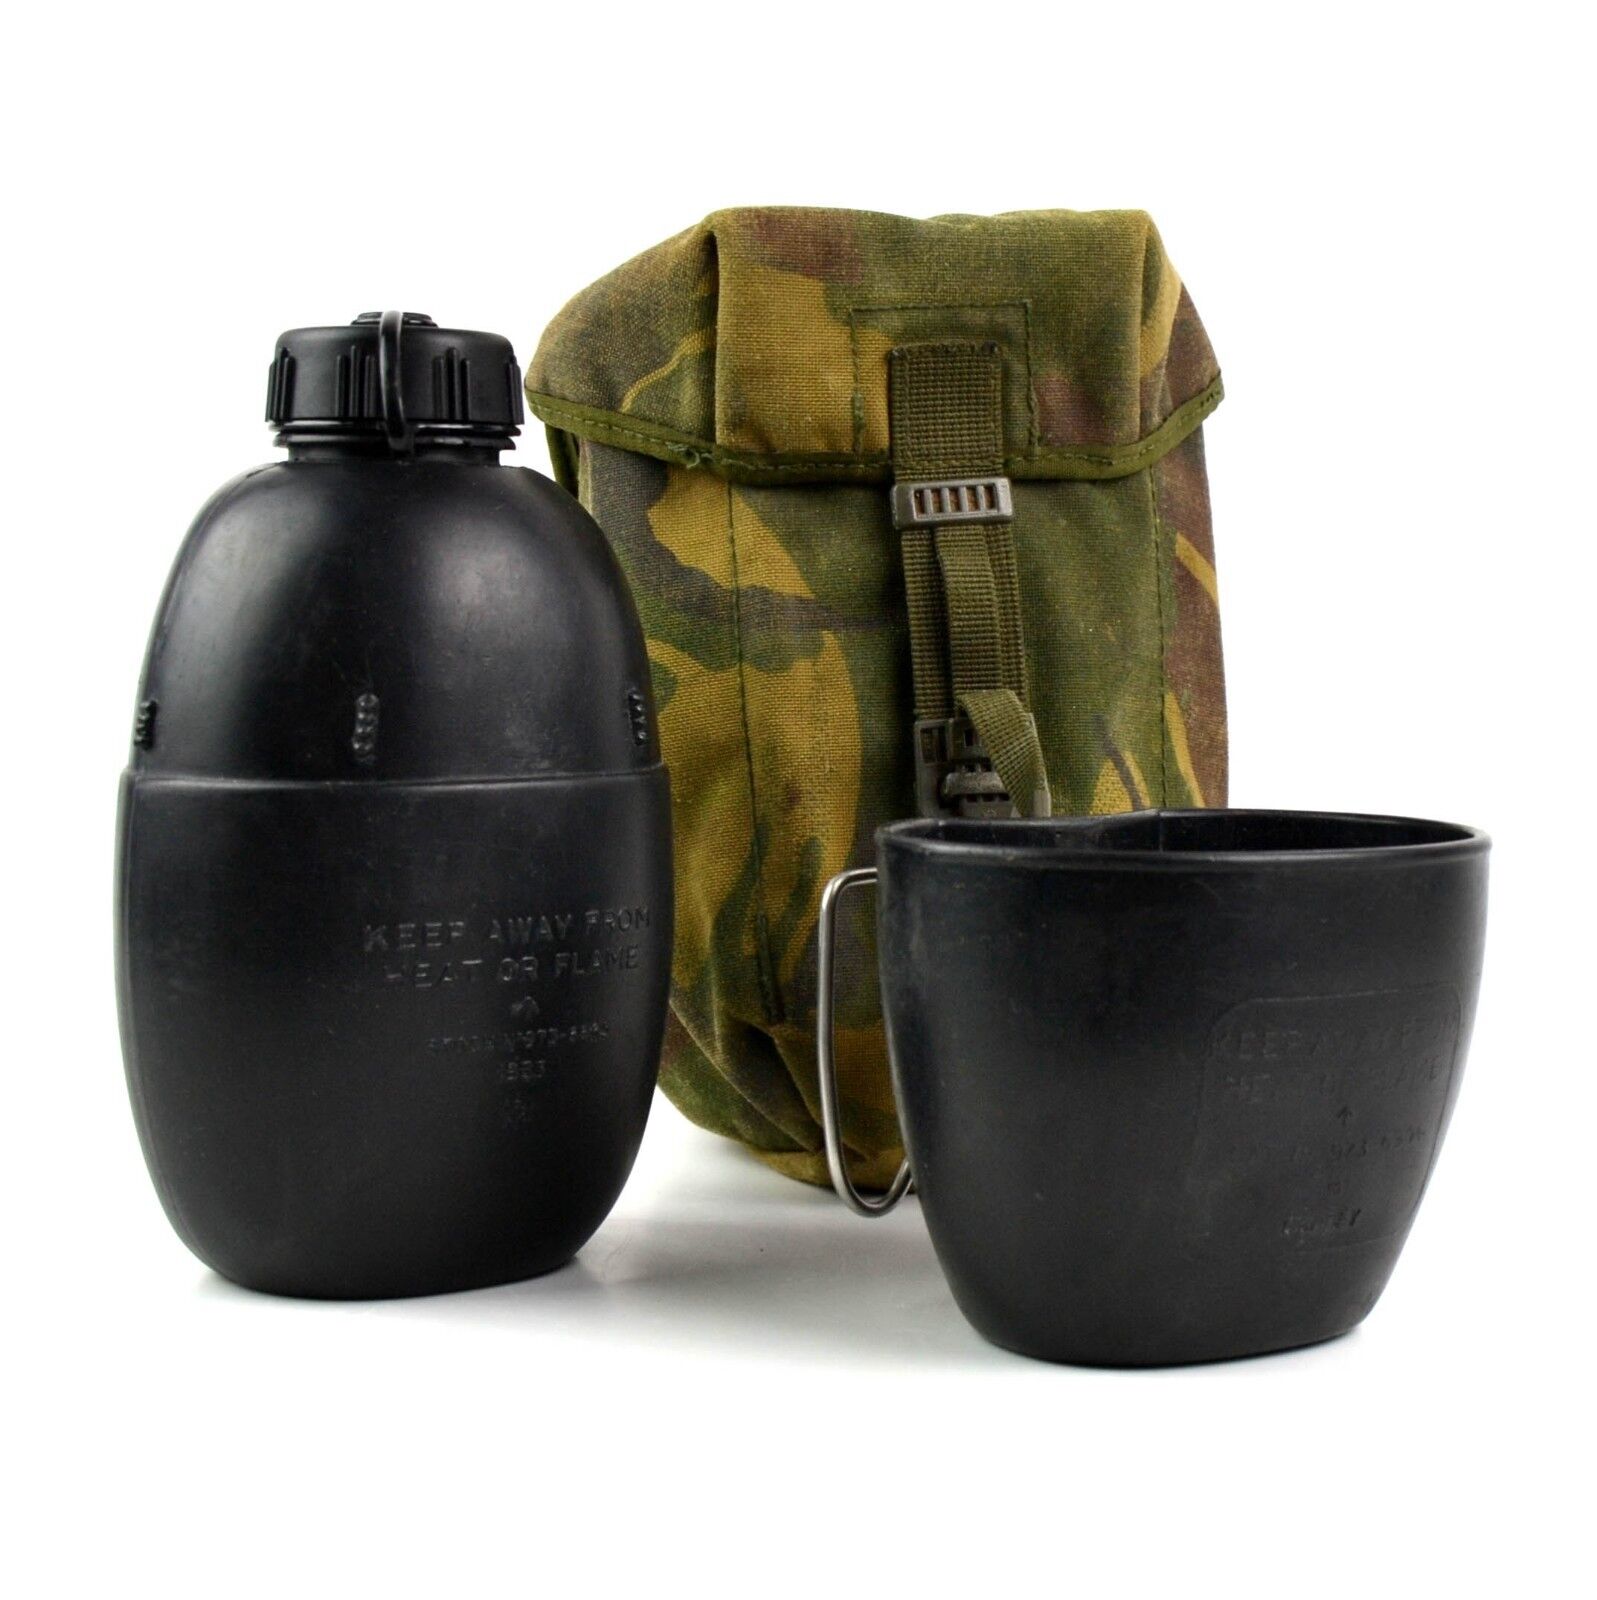 Original genuine british army canteen with mug 58 water bottle with pouch